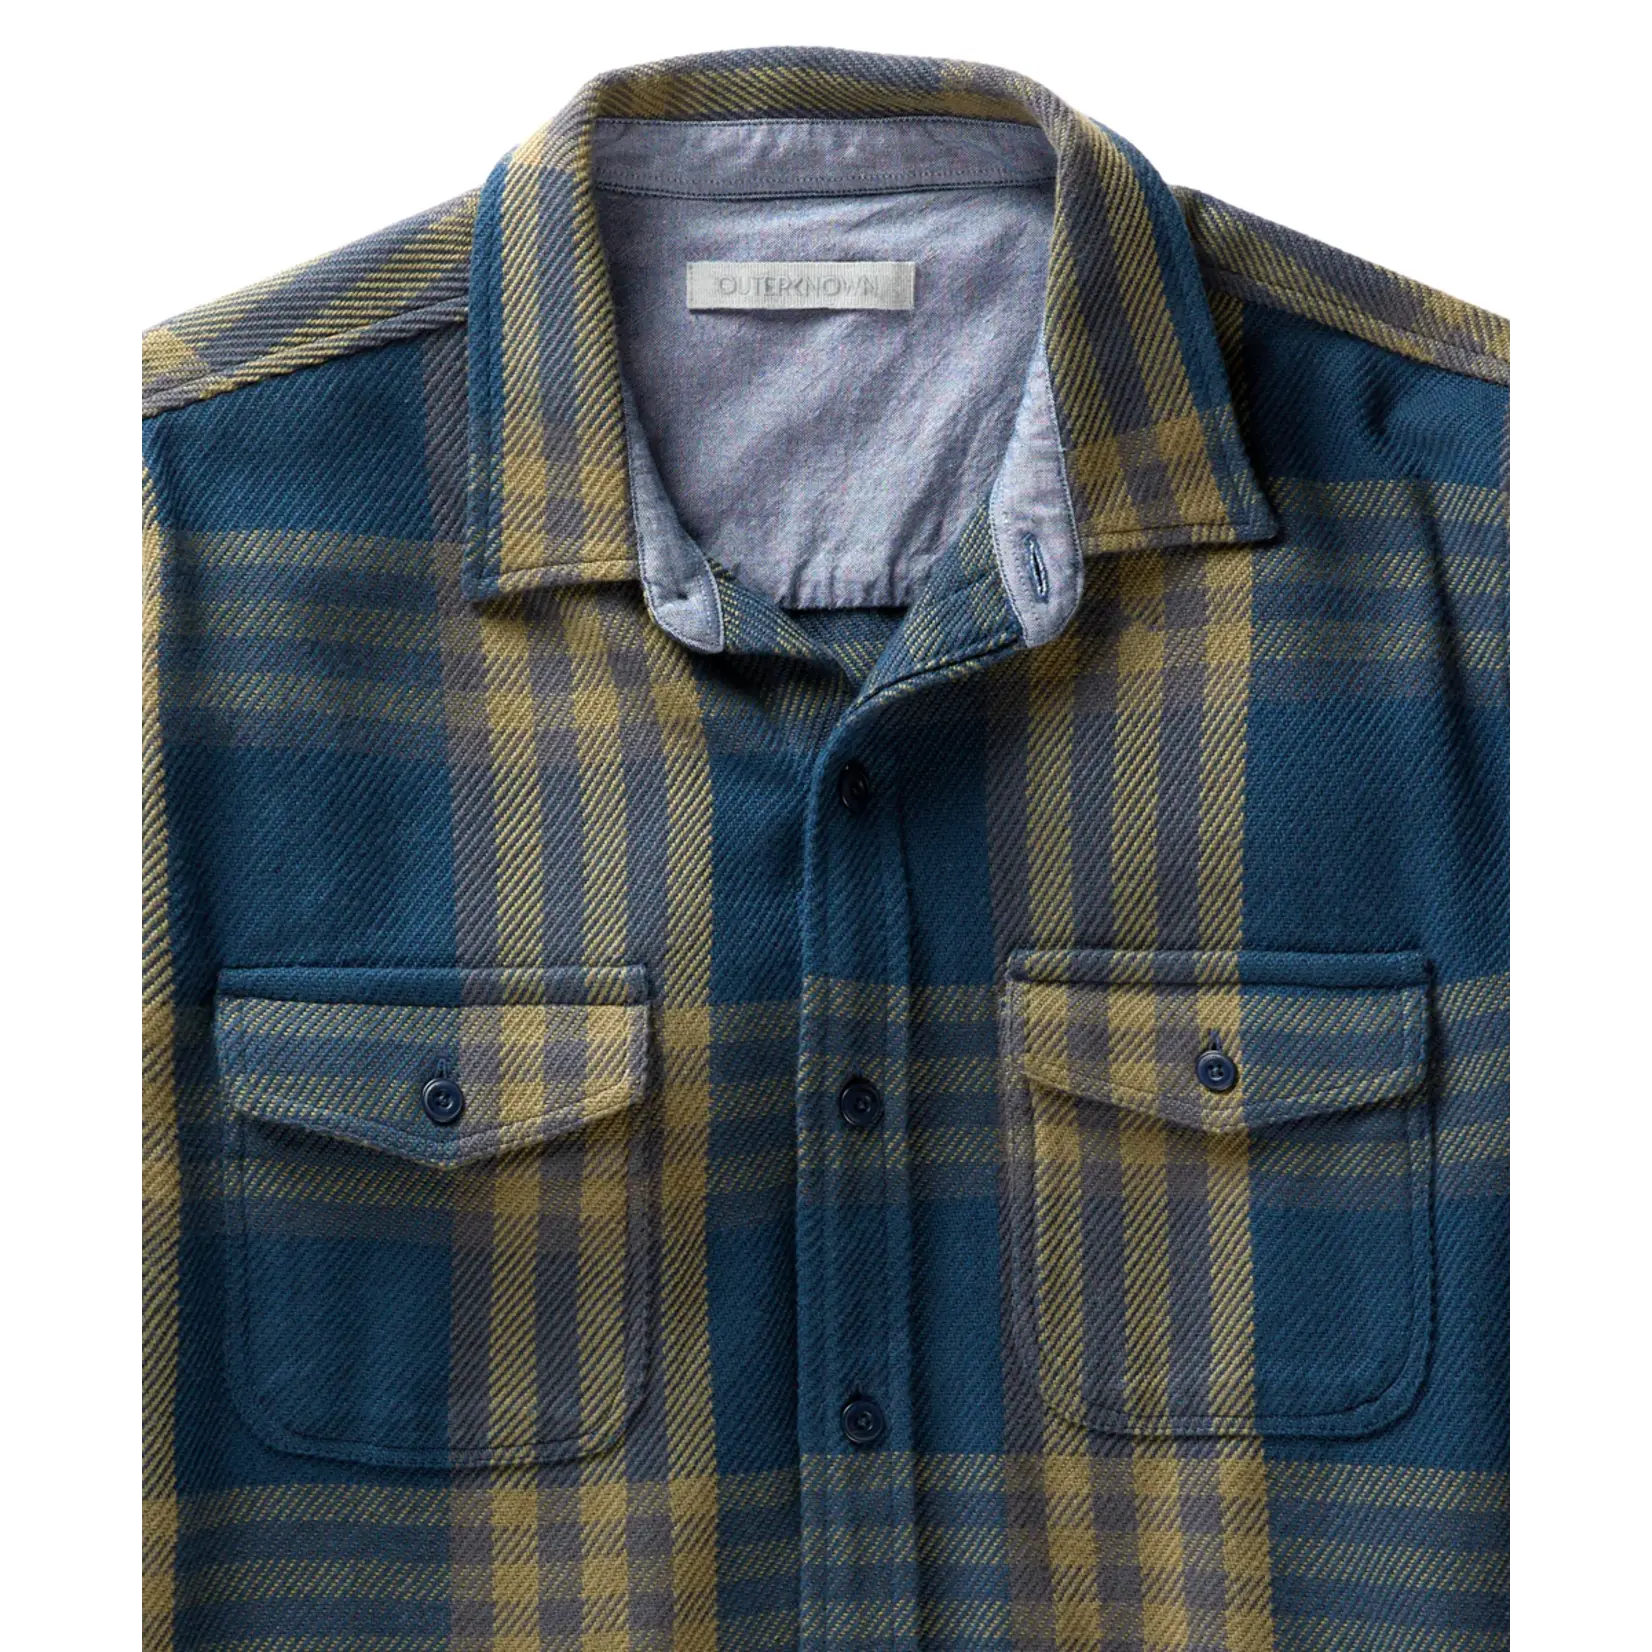 OuterKnown BLANKET SHIRT